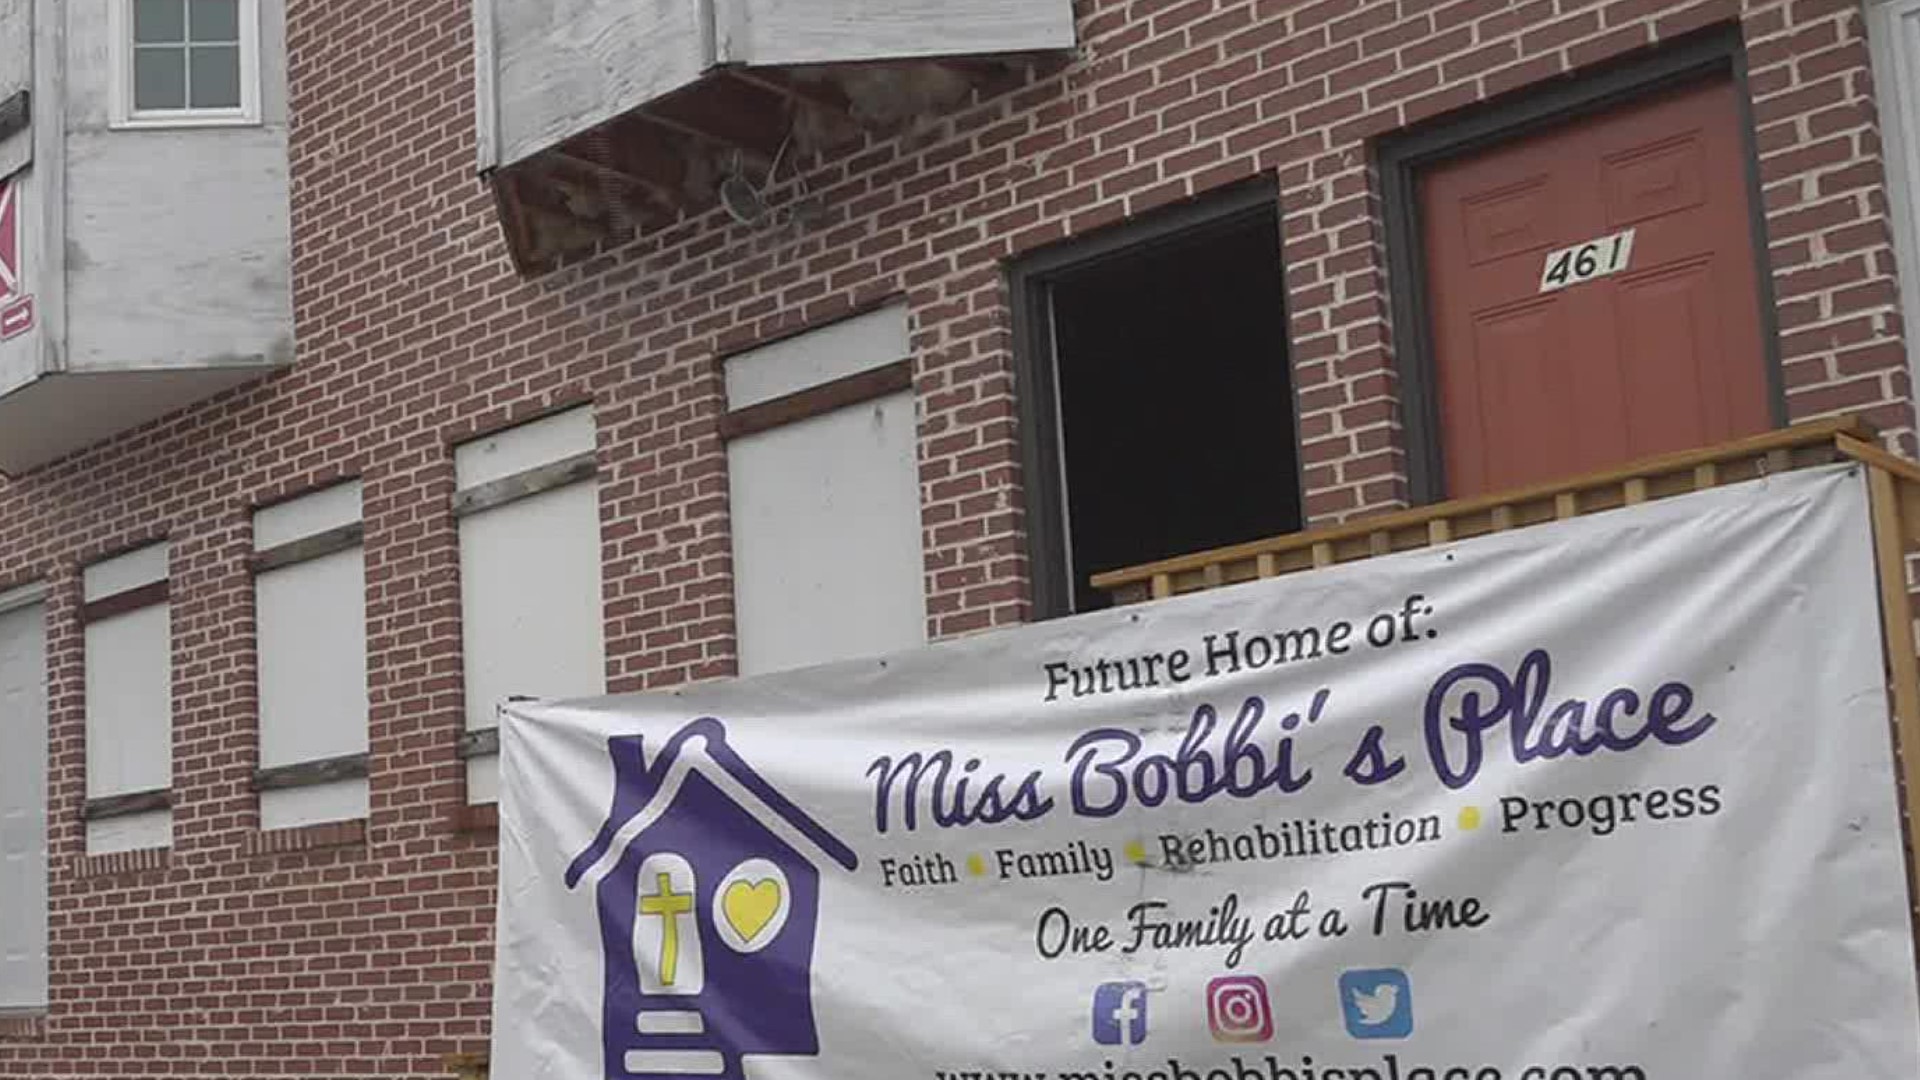 The shelter, Miss Bobbi's Place, is offering families in need a safe place to get back on their feet.